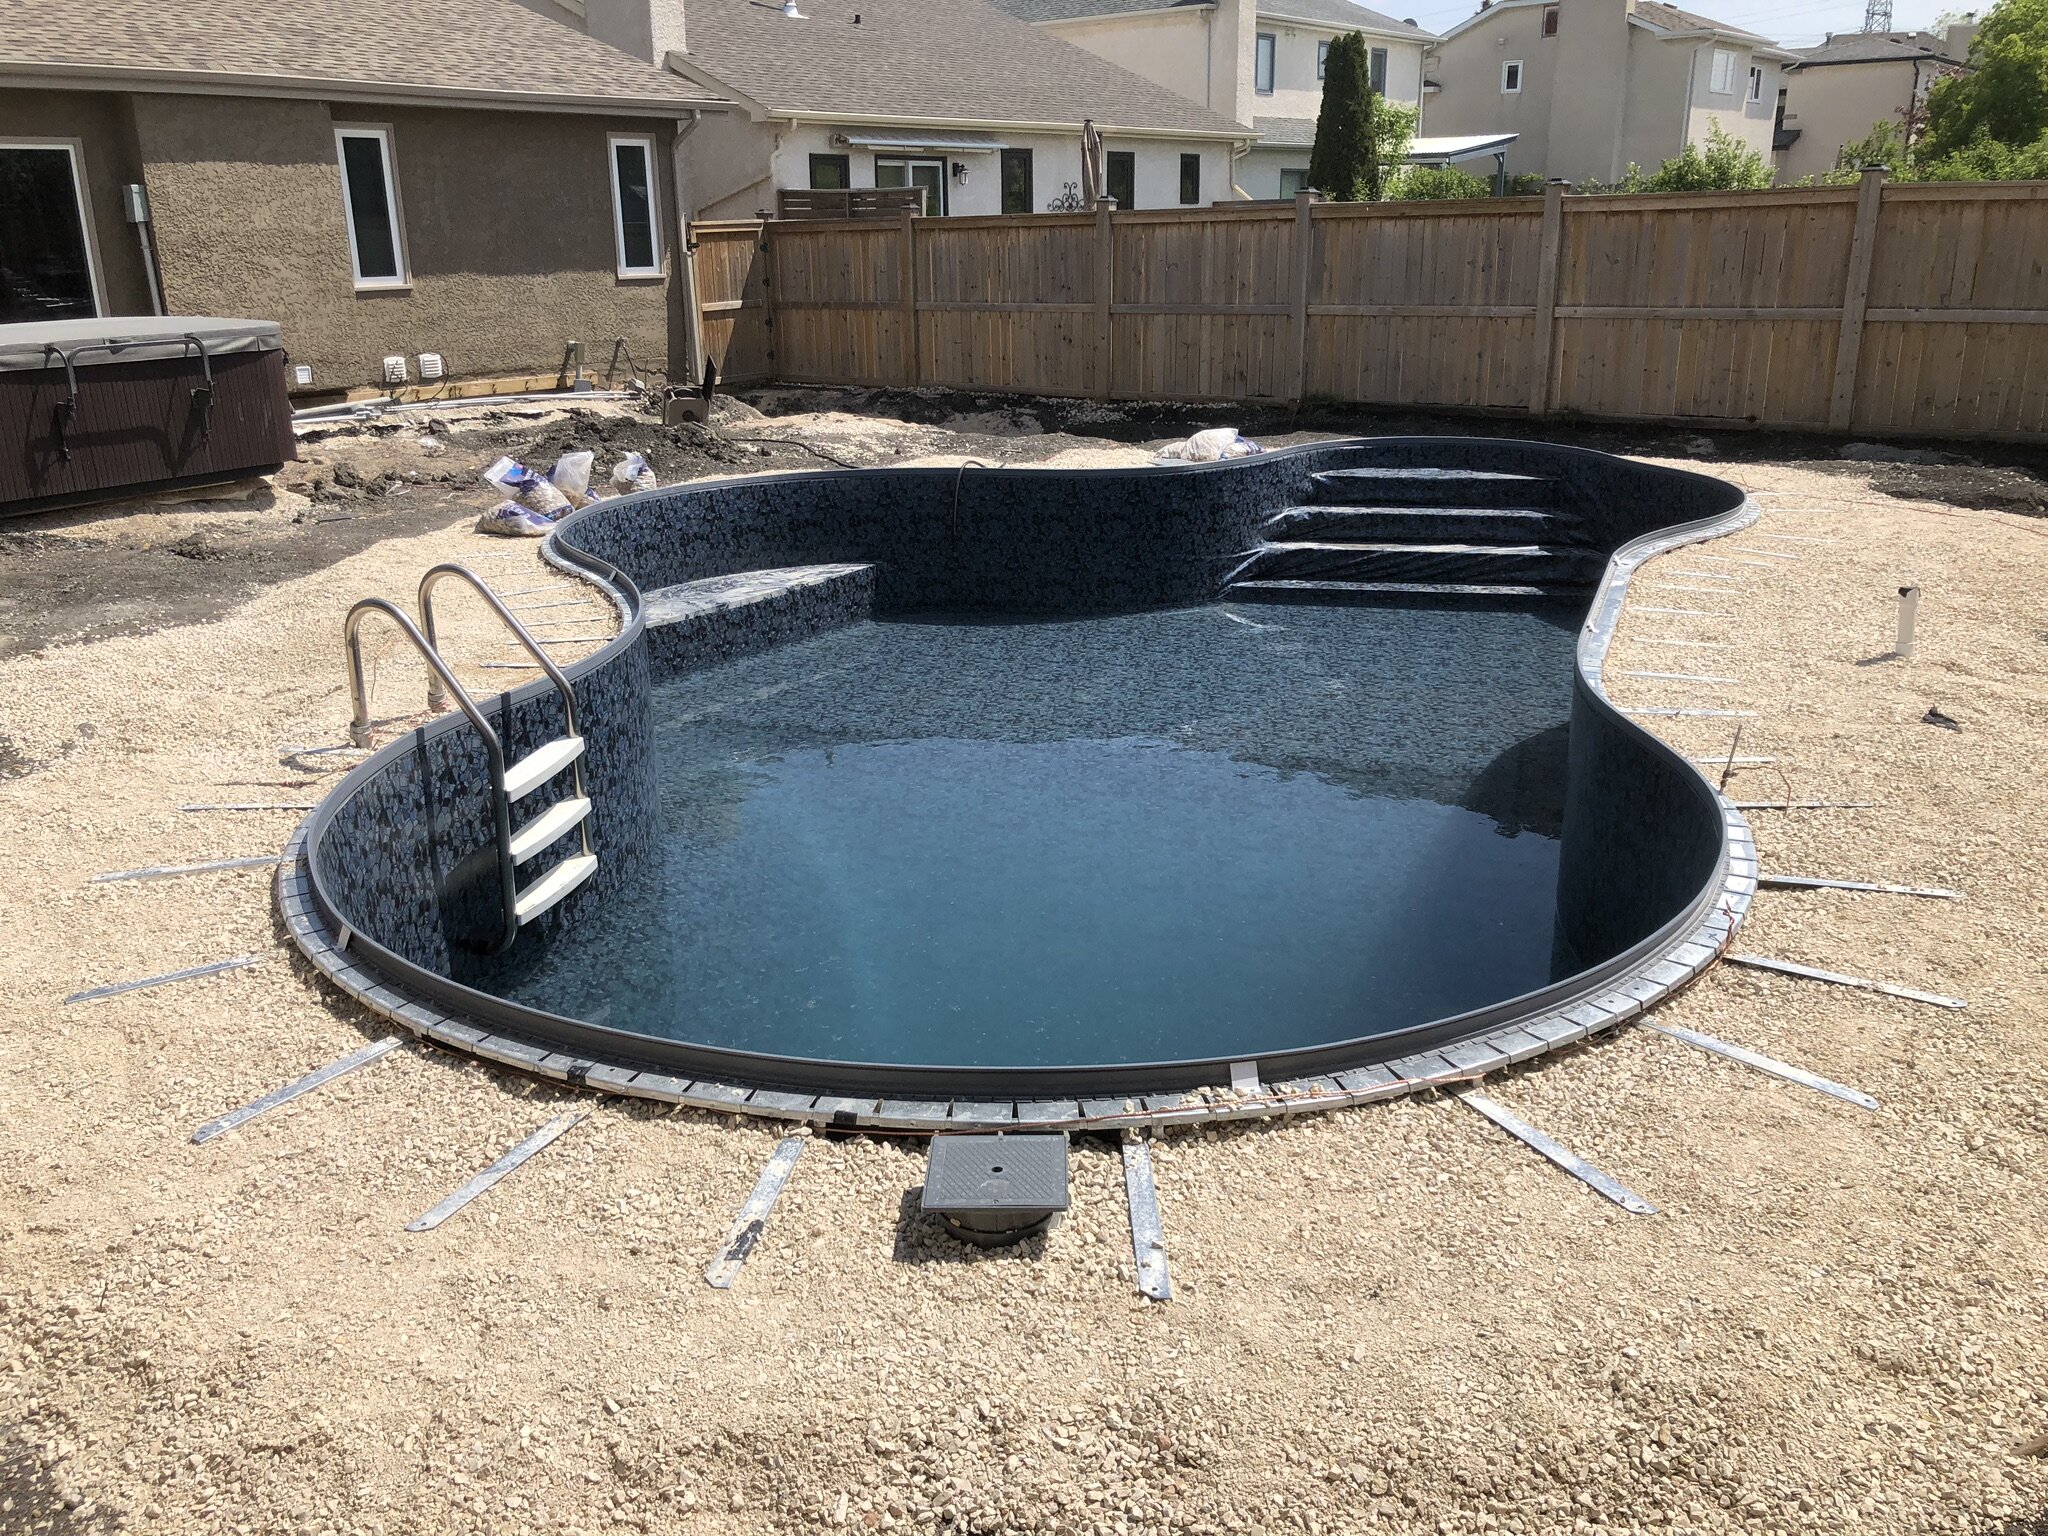 What Materials Are Used in The Construction of a Black Bottom Pool?